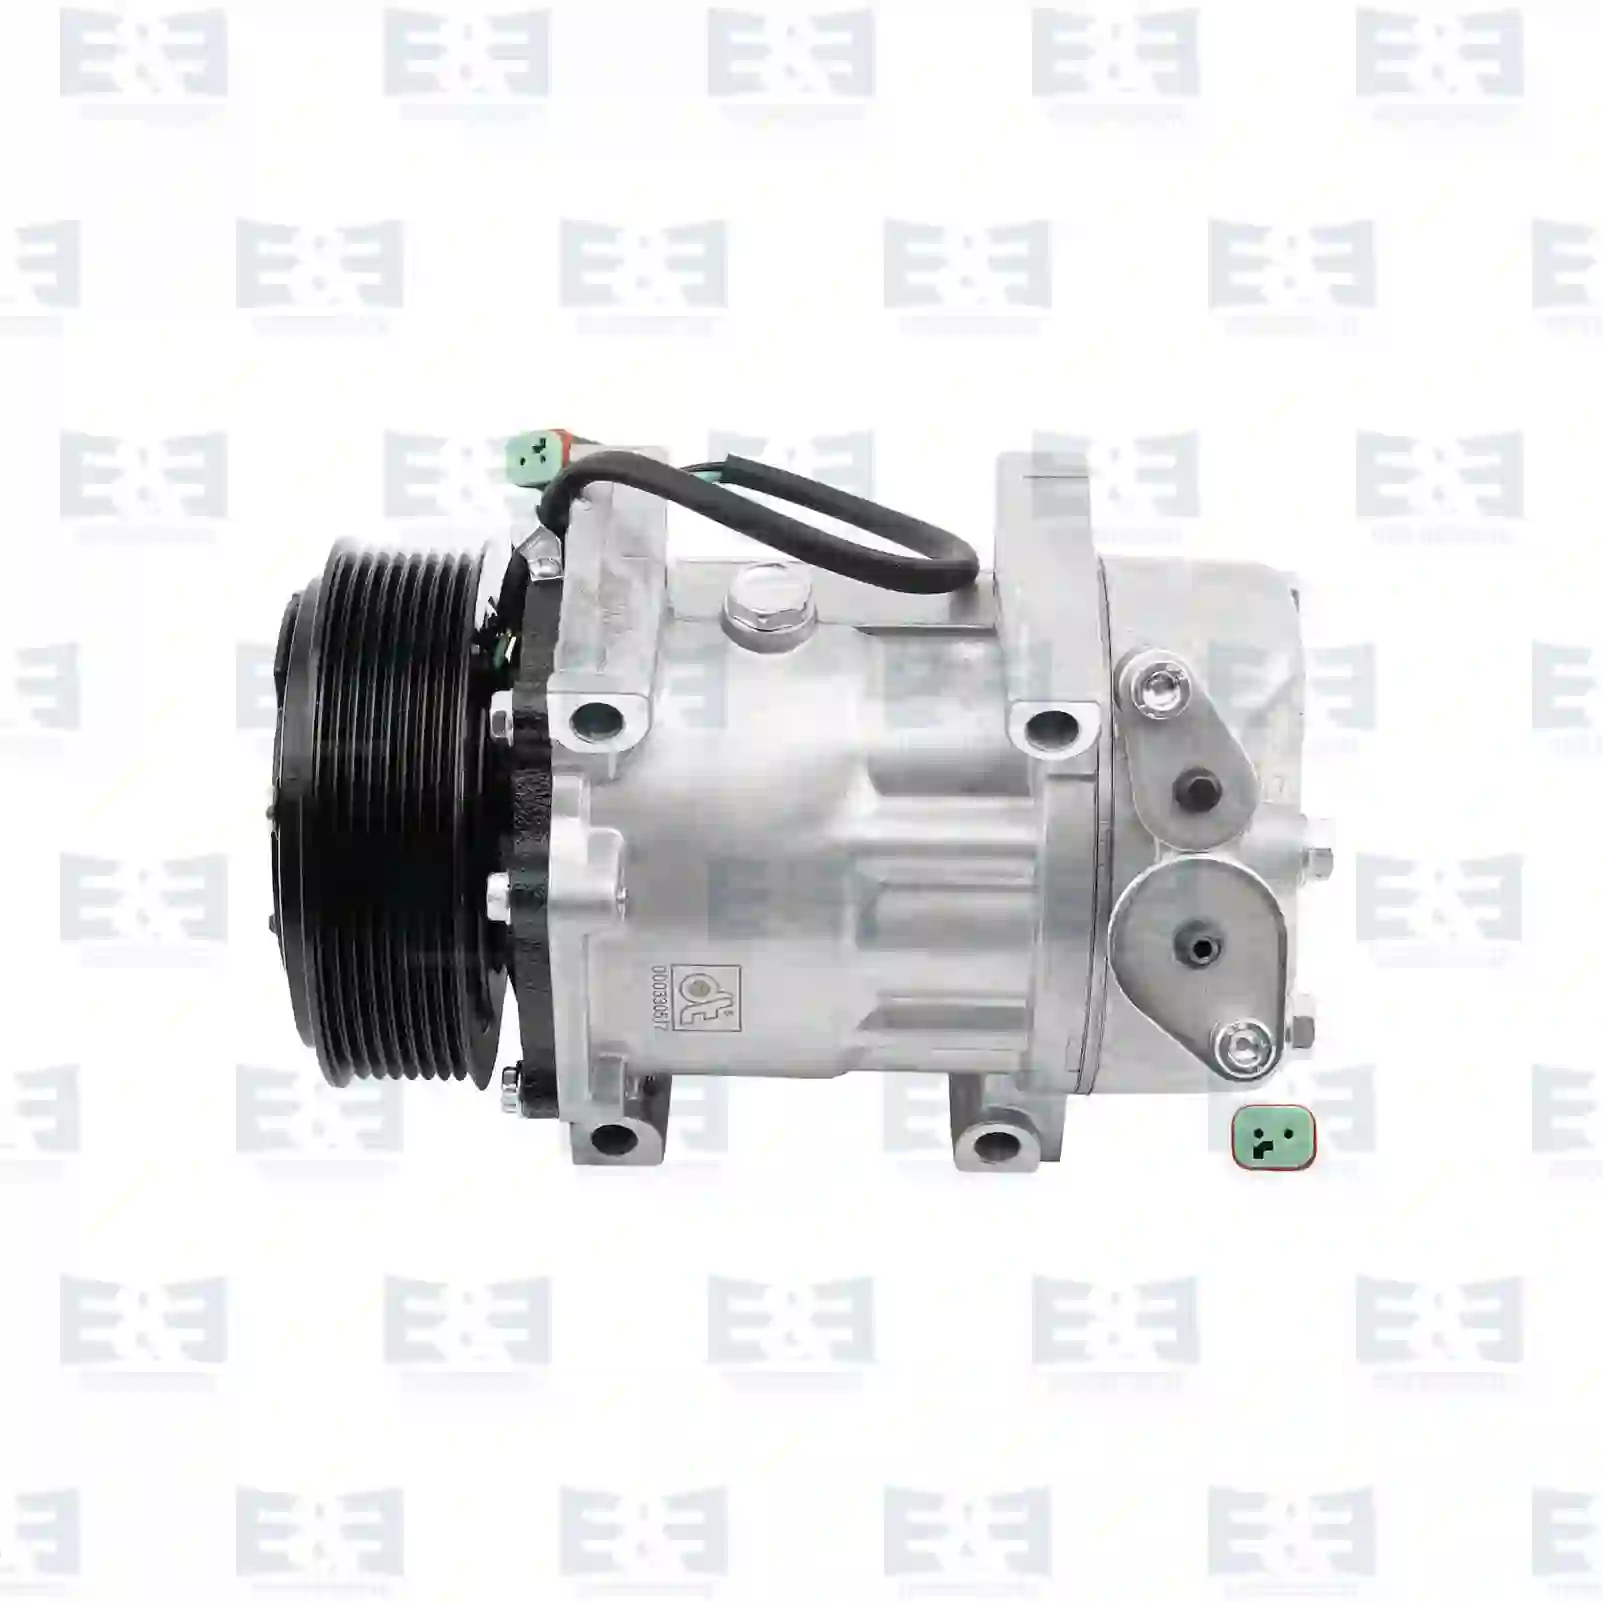 Compressor, Air Conditioning Compressor, air conditioning, oil filled, EE No 2E2276625 ,  oem no:10570894, 10575186, 1376998, 1412263, 1888034, 570894, 575186, 575188, ZG60391-0008 E&E Truck Spare Parts | Truck Spare Parts, Auotomotive Spare Parts